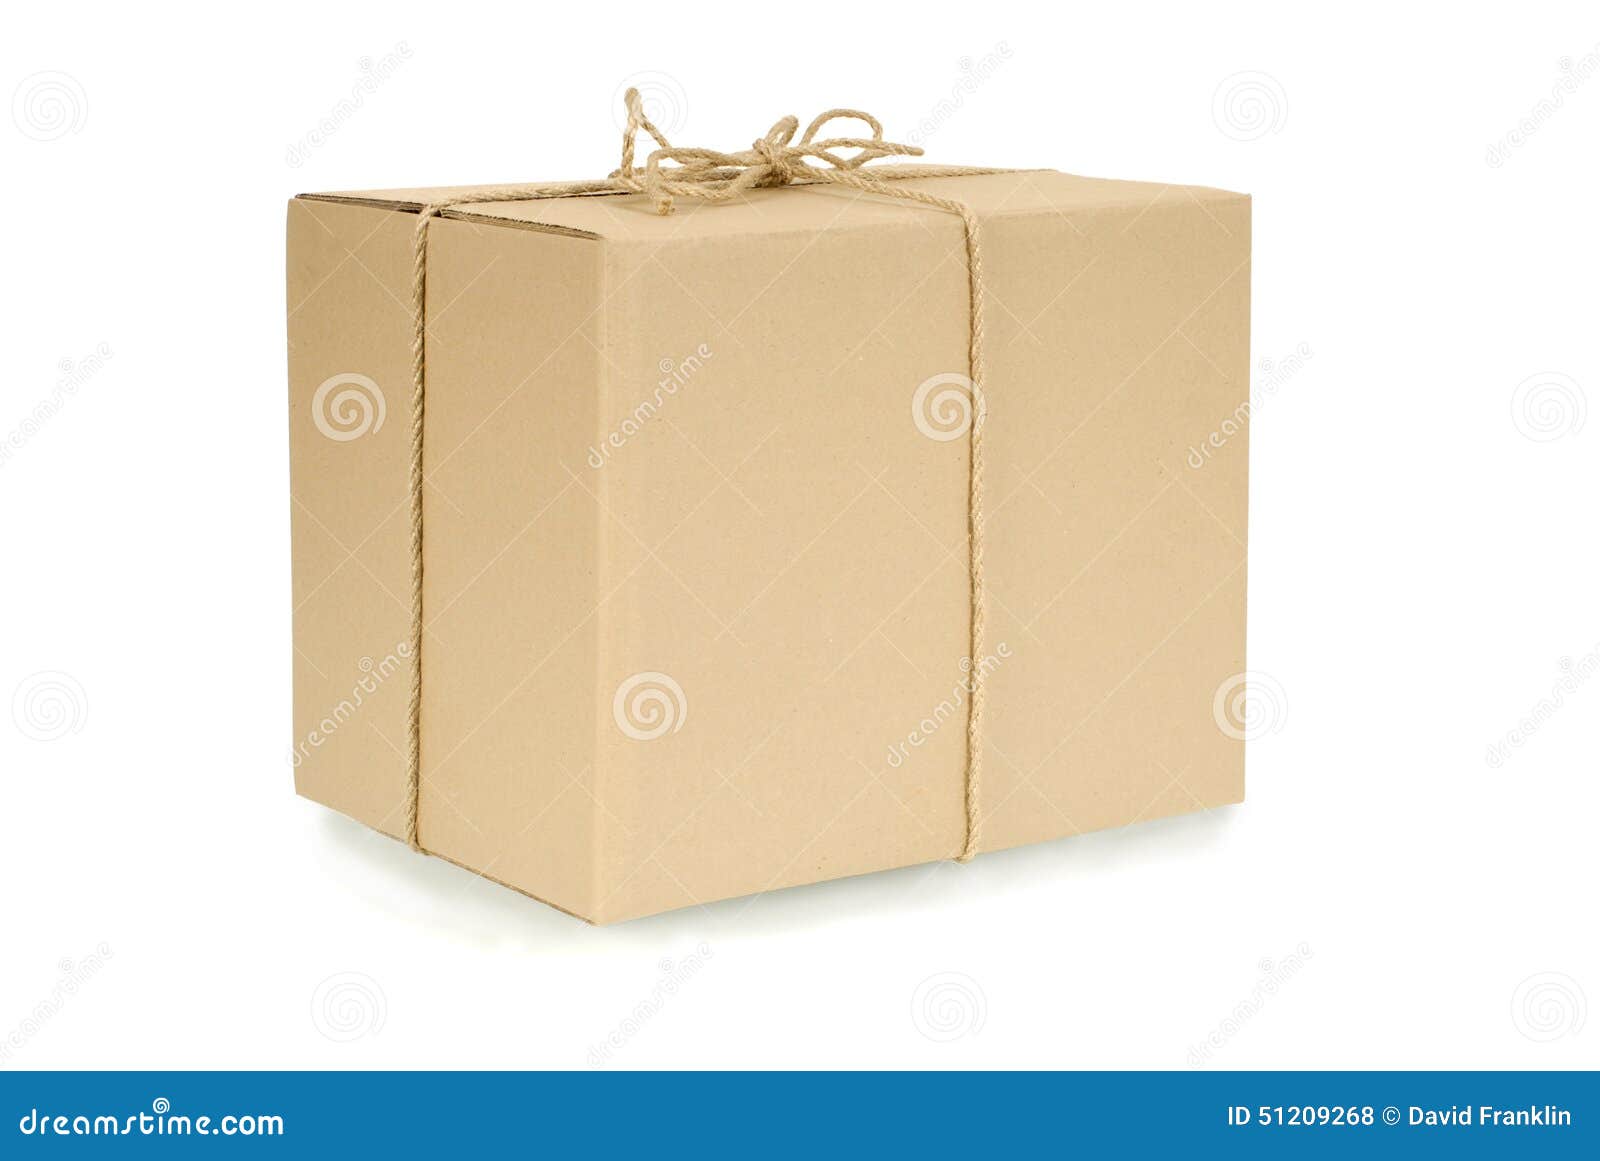 Carboard Box Tied with Rope Isolated on White Background, Copy